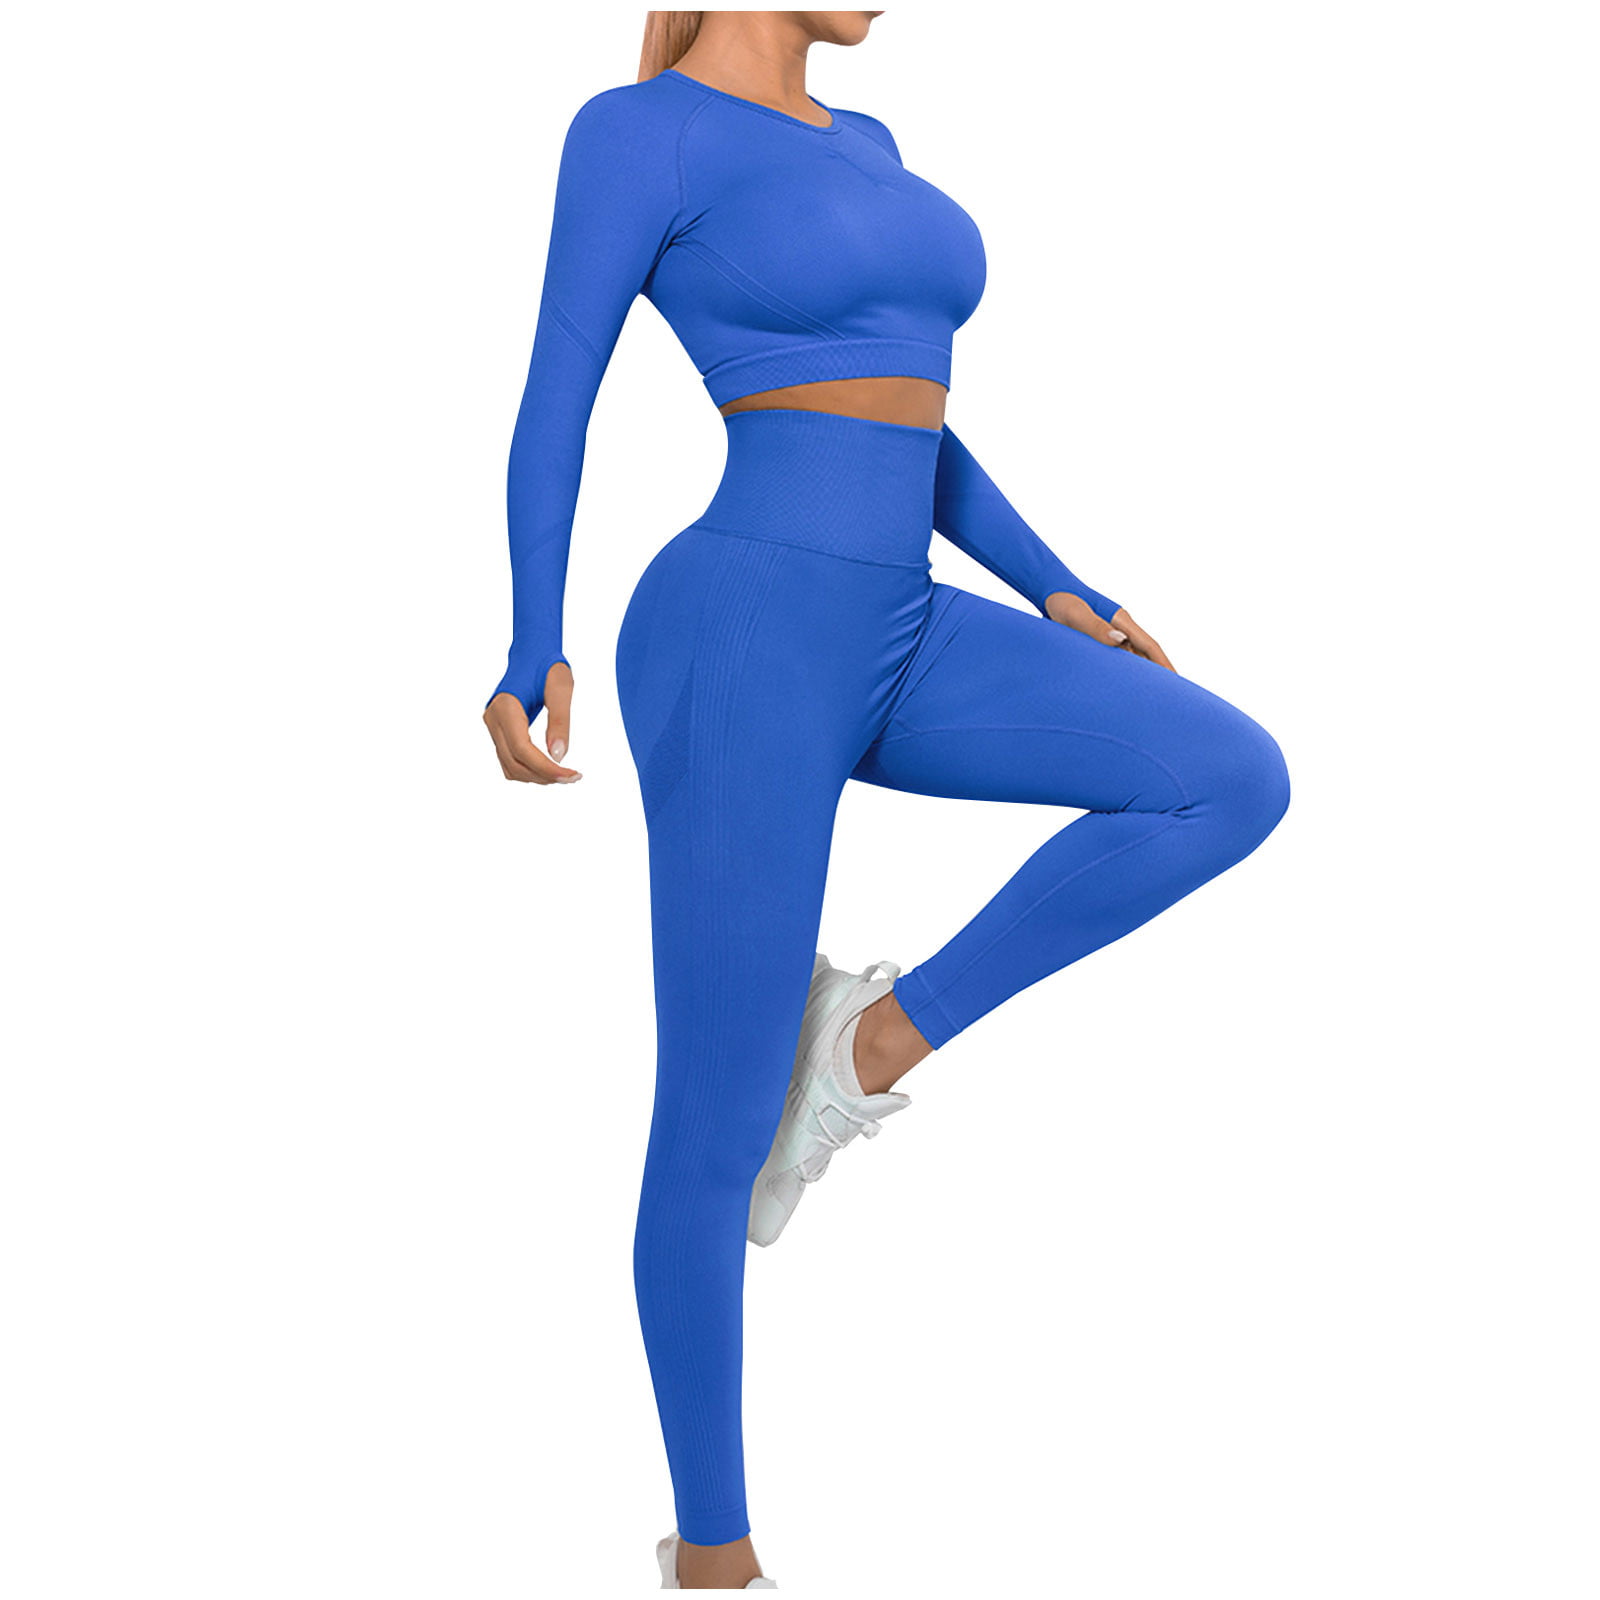 RQYYD Women's Seamless 2 Piece Outfits Workout Long Sleeve Crop Top Tummy  Control High Waist Yoga Legging Sets Blue S